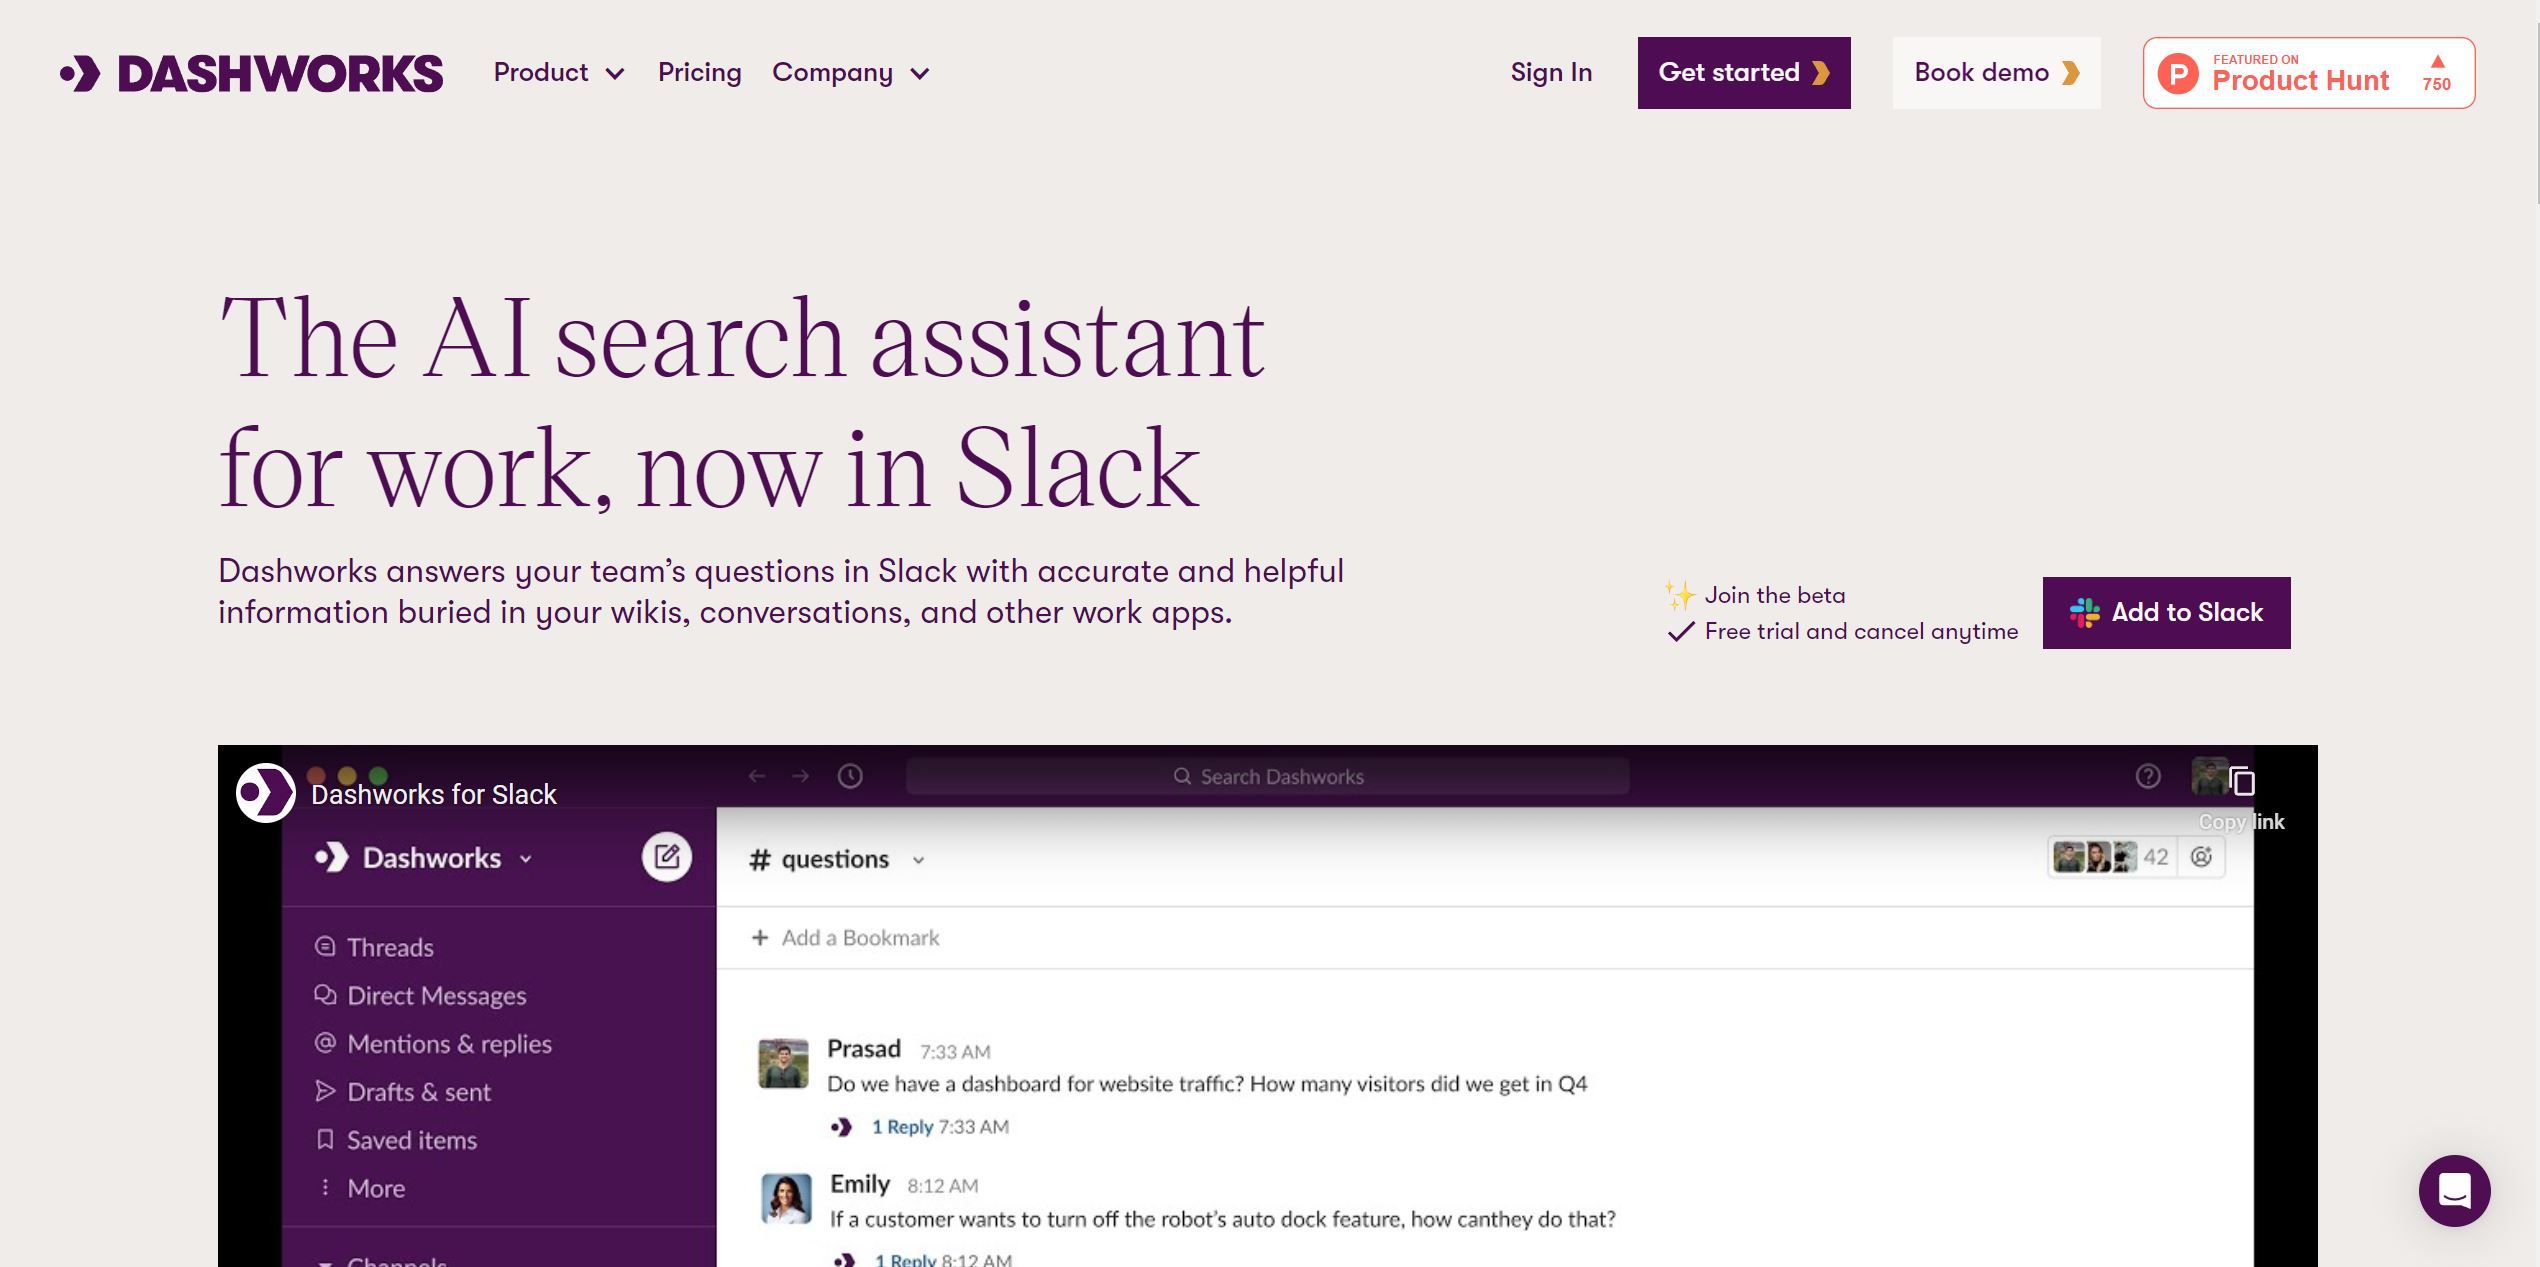  Find info fast in Slack conversations and work